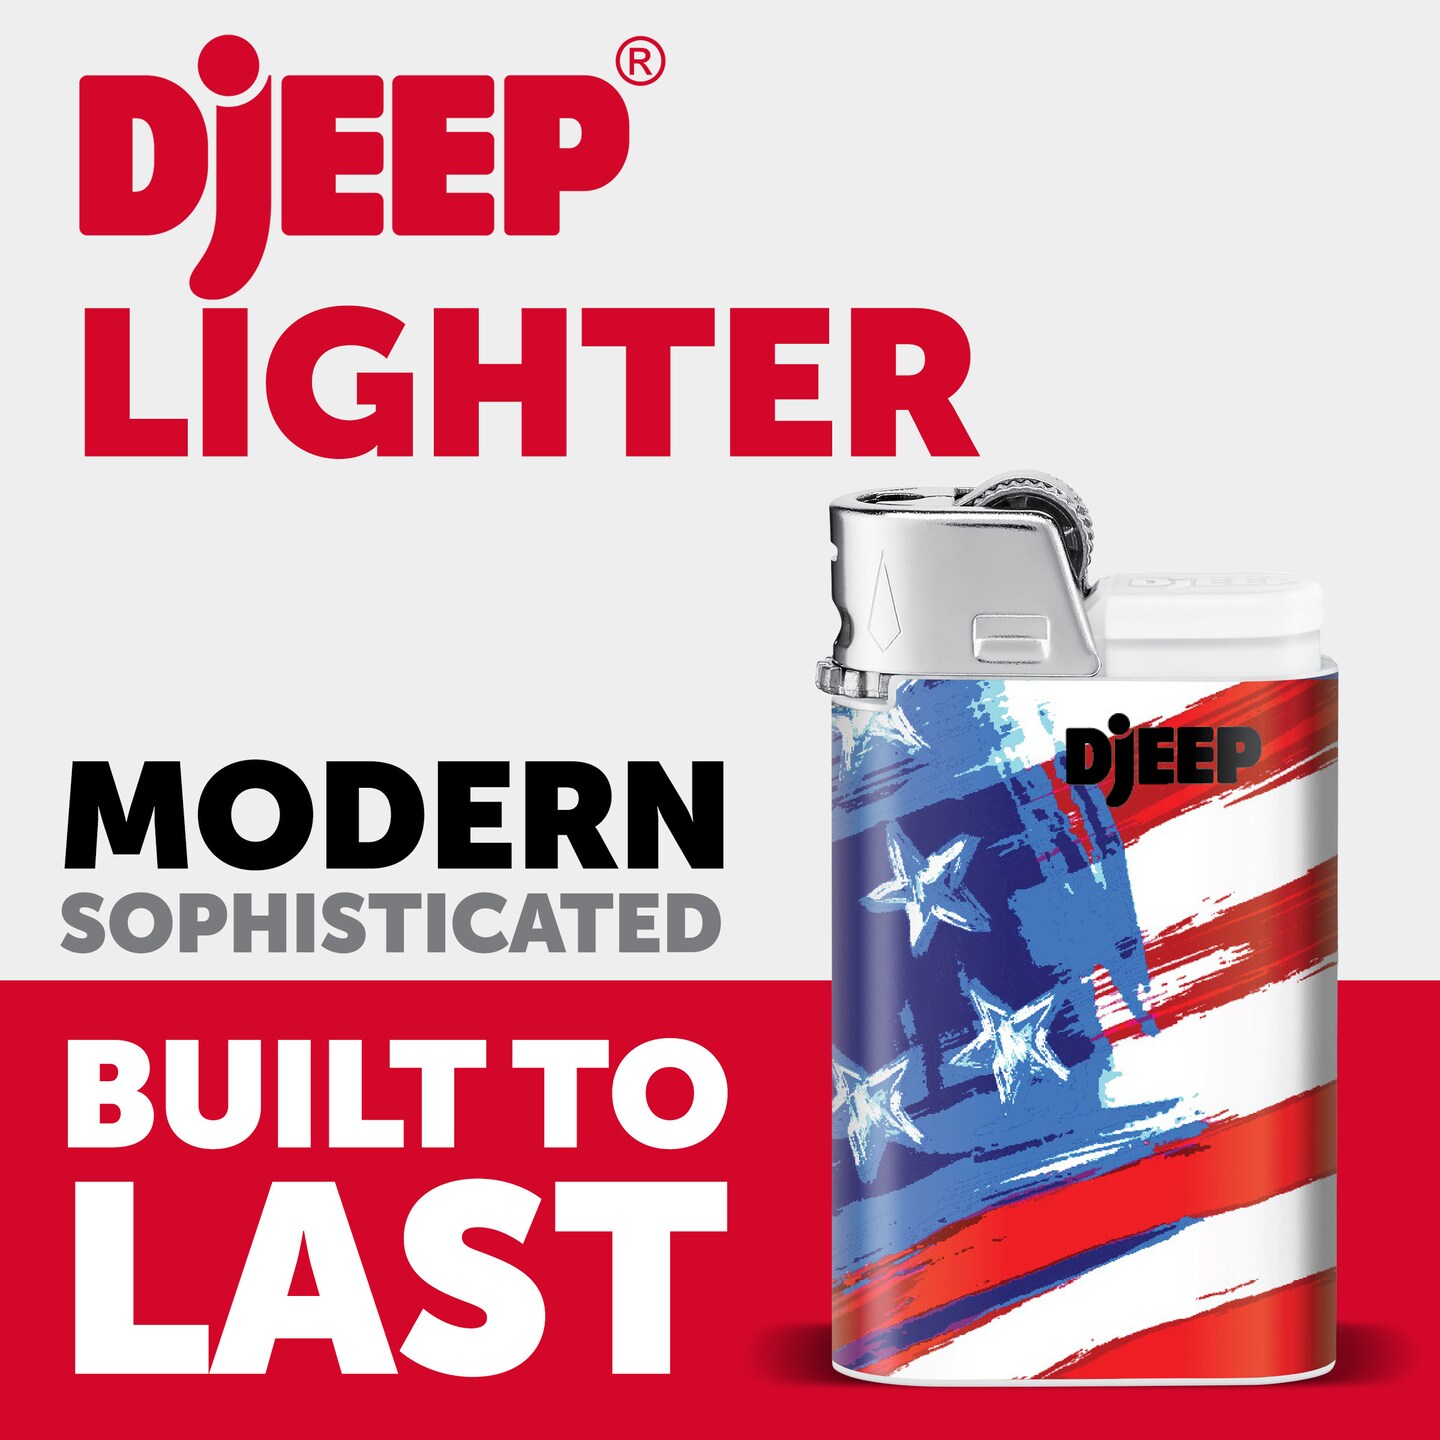 DJEEP Pocket Lighters, AMERICANA Collection Textured Metallic, Unique Lighters, 4 Count Pack of Disposable Lighters